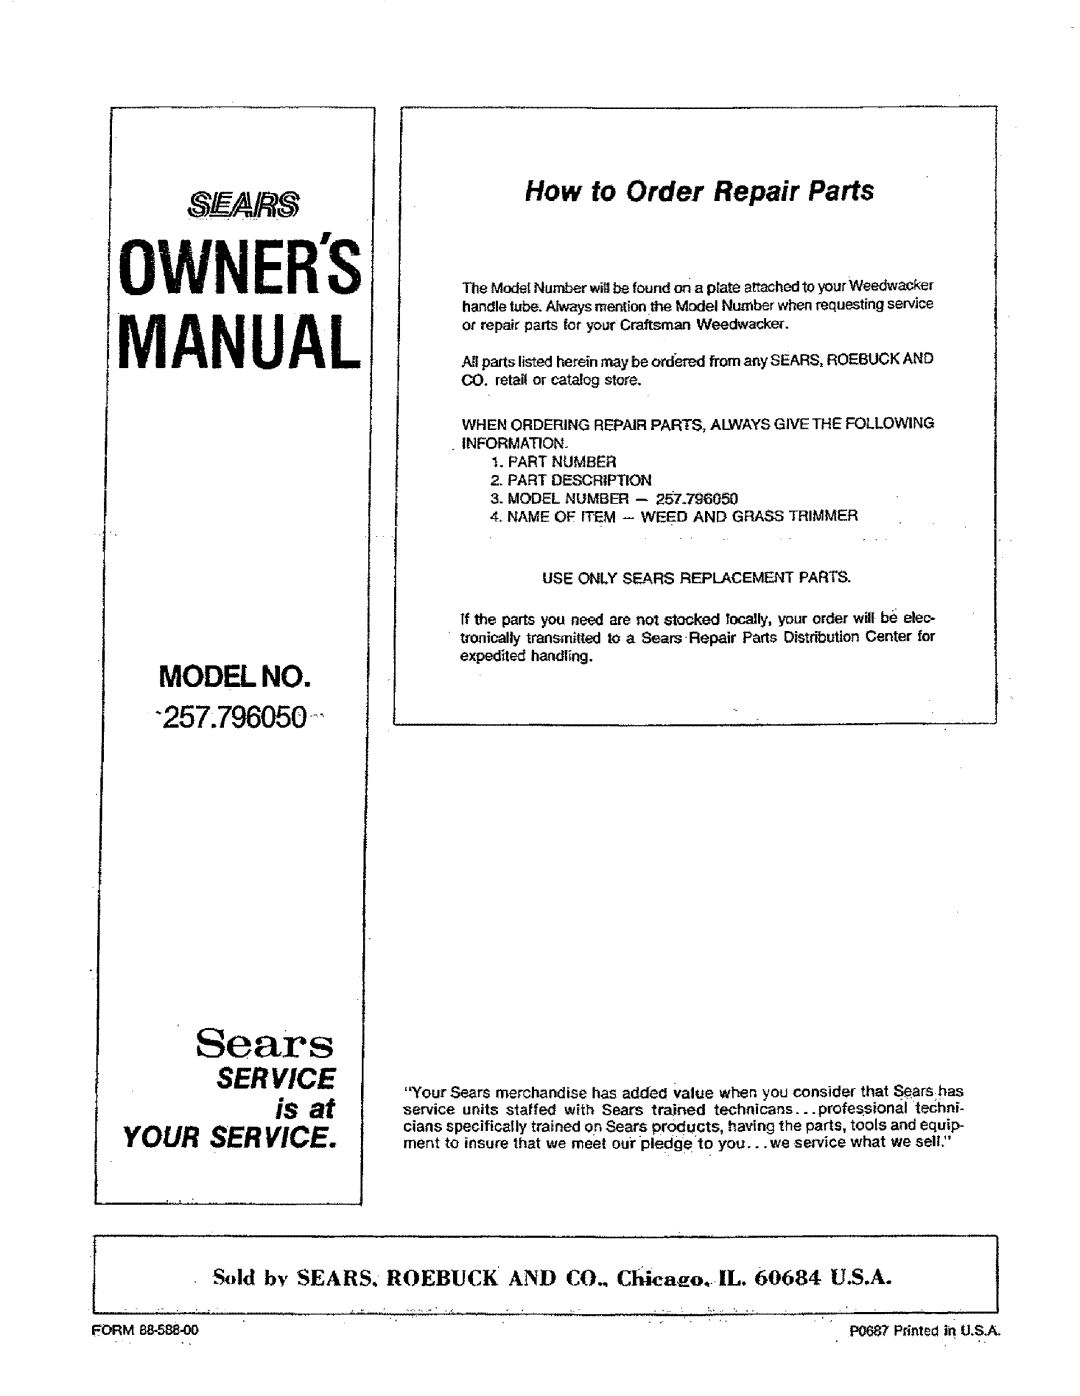 Sears manual Model No, 257.796050, Sold by SEARS, ROEBUCK, AND CO., Chica o,.,IL, 60684 U.S.A, Owners, Sears 